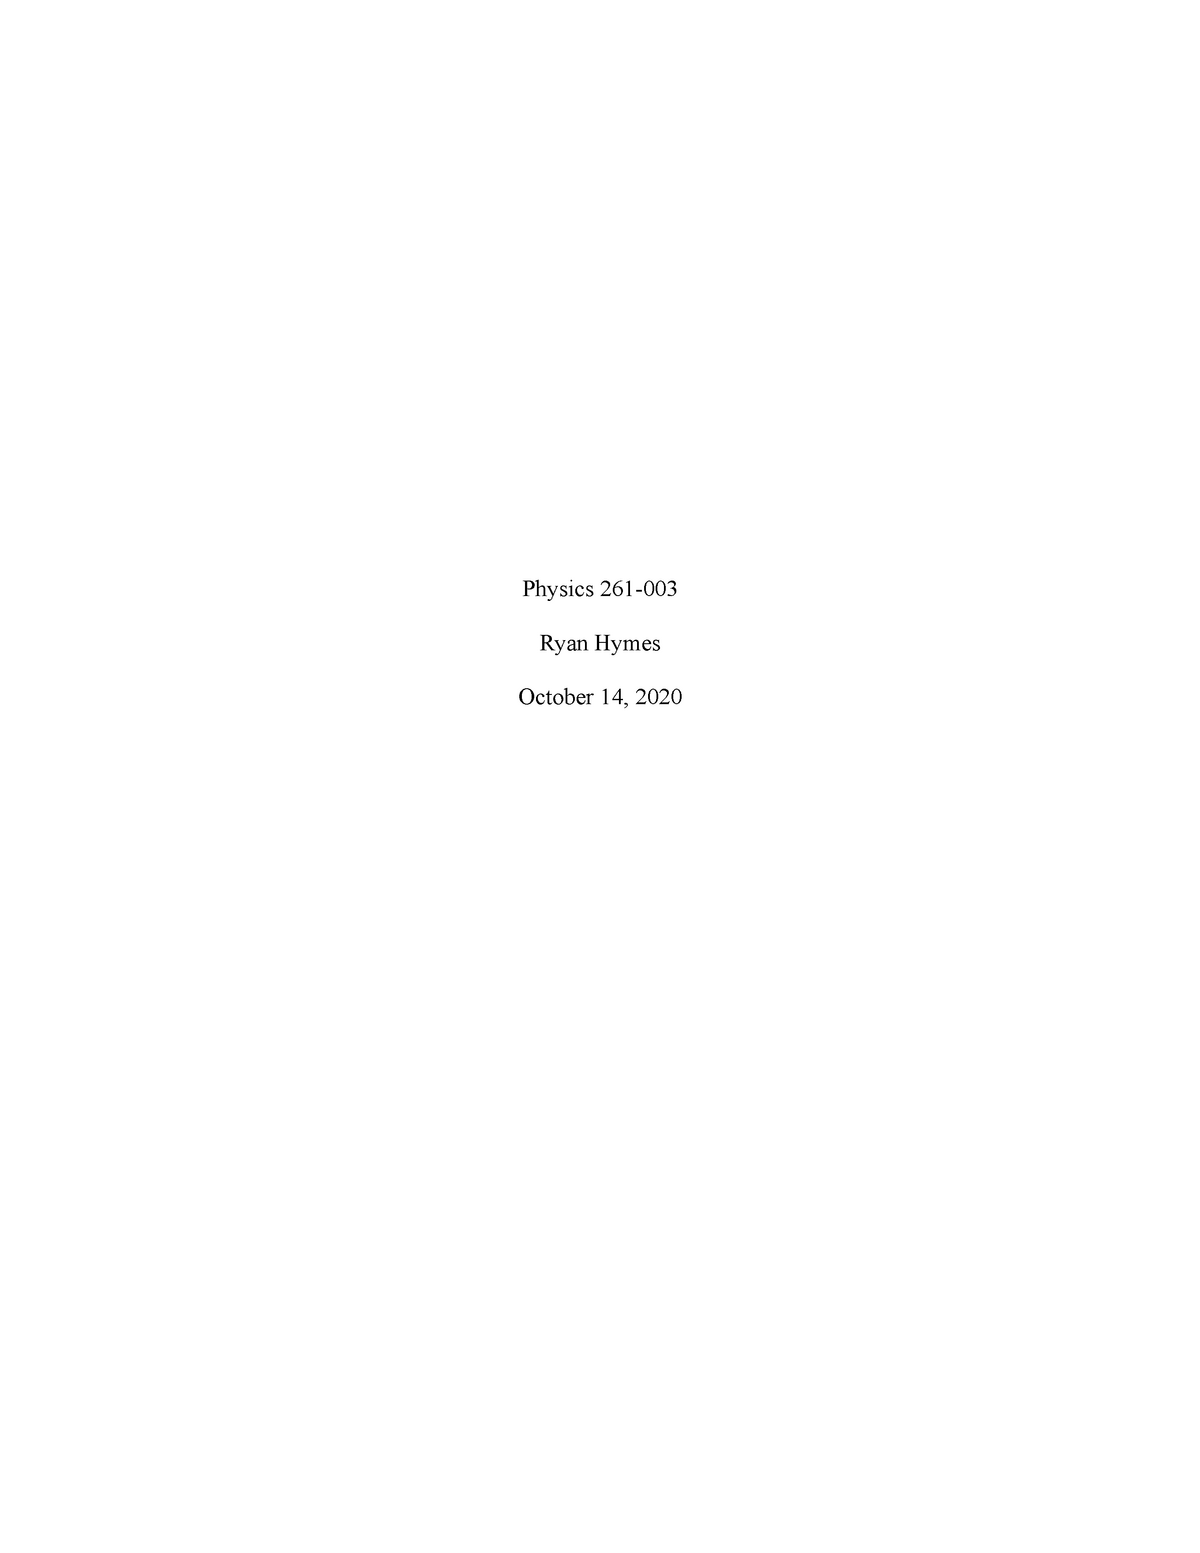 Phys 261 lab report 3 - Physics 261- Ryan Hymes October 14, 2020 ...